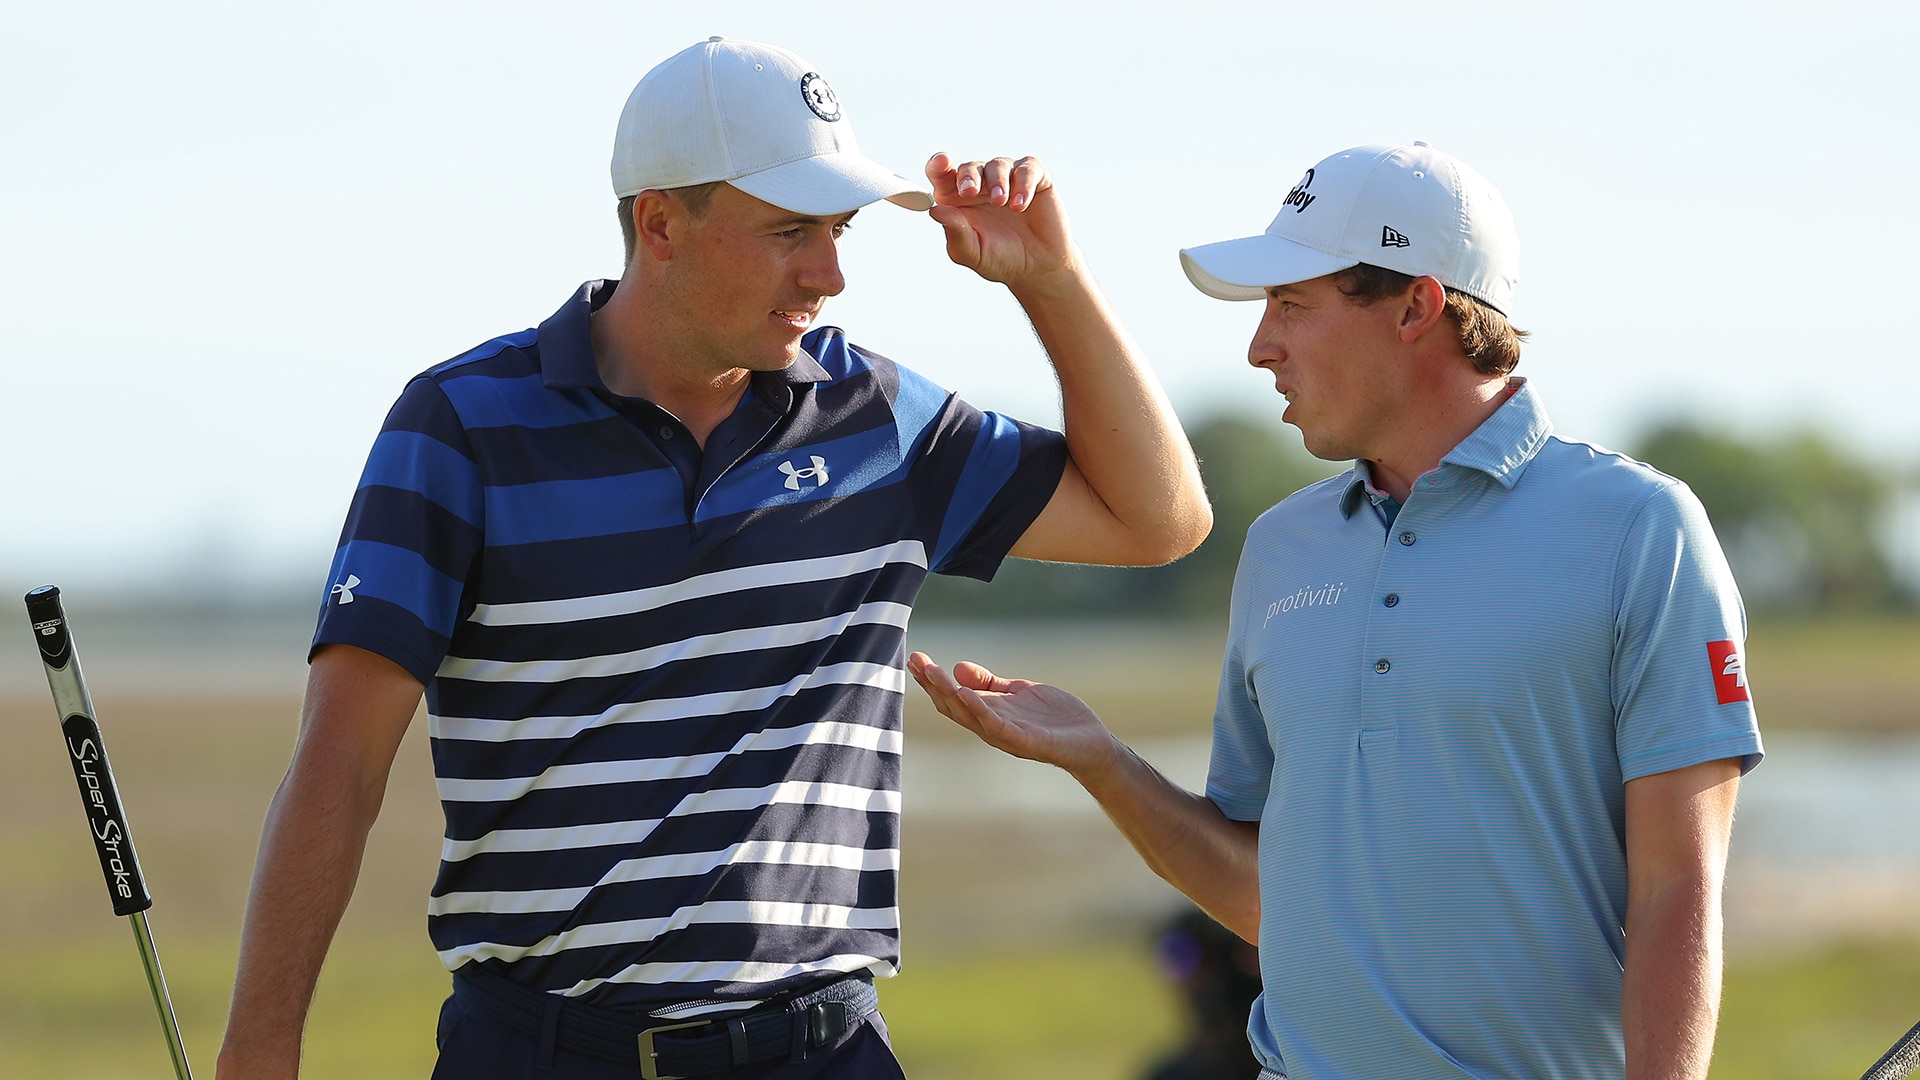 2023 RBC Heritage payout: Jordan Spieth earns more money in defeat than in victory a year ago